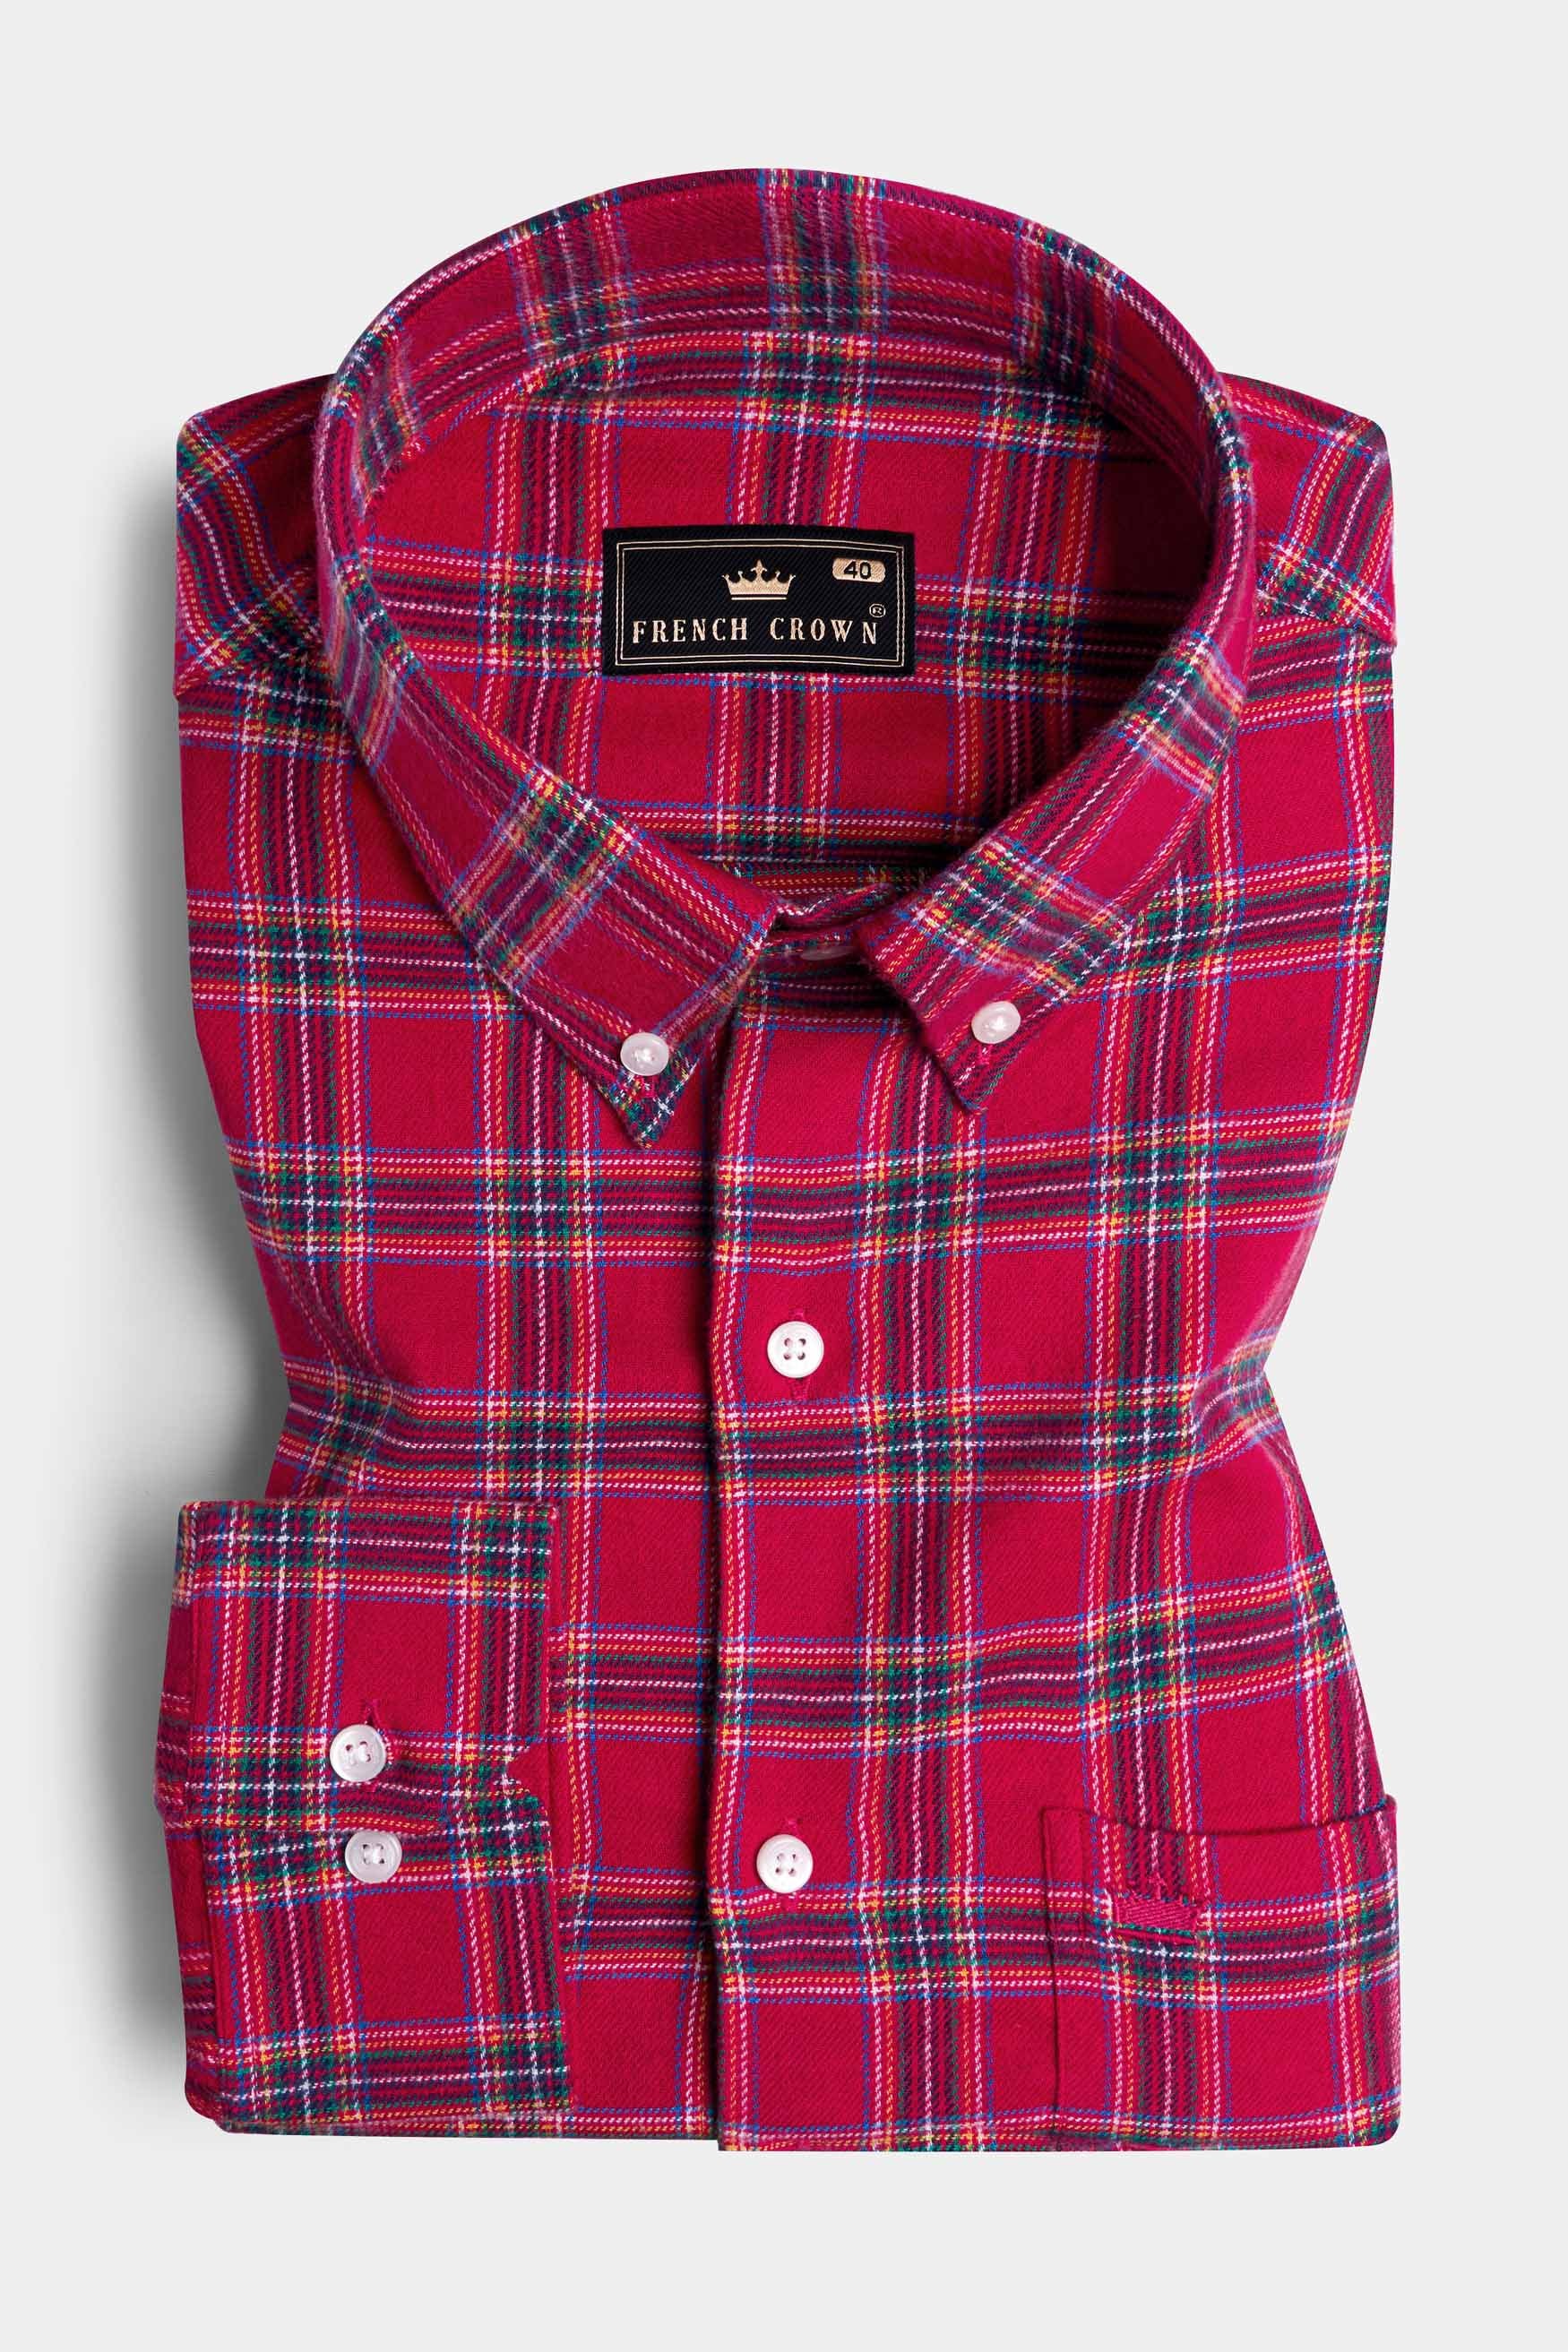 Shiraz Red with Mariner Blue Plaid Flannel Button Down Shirt